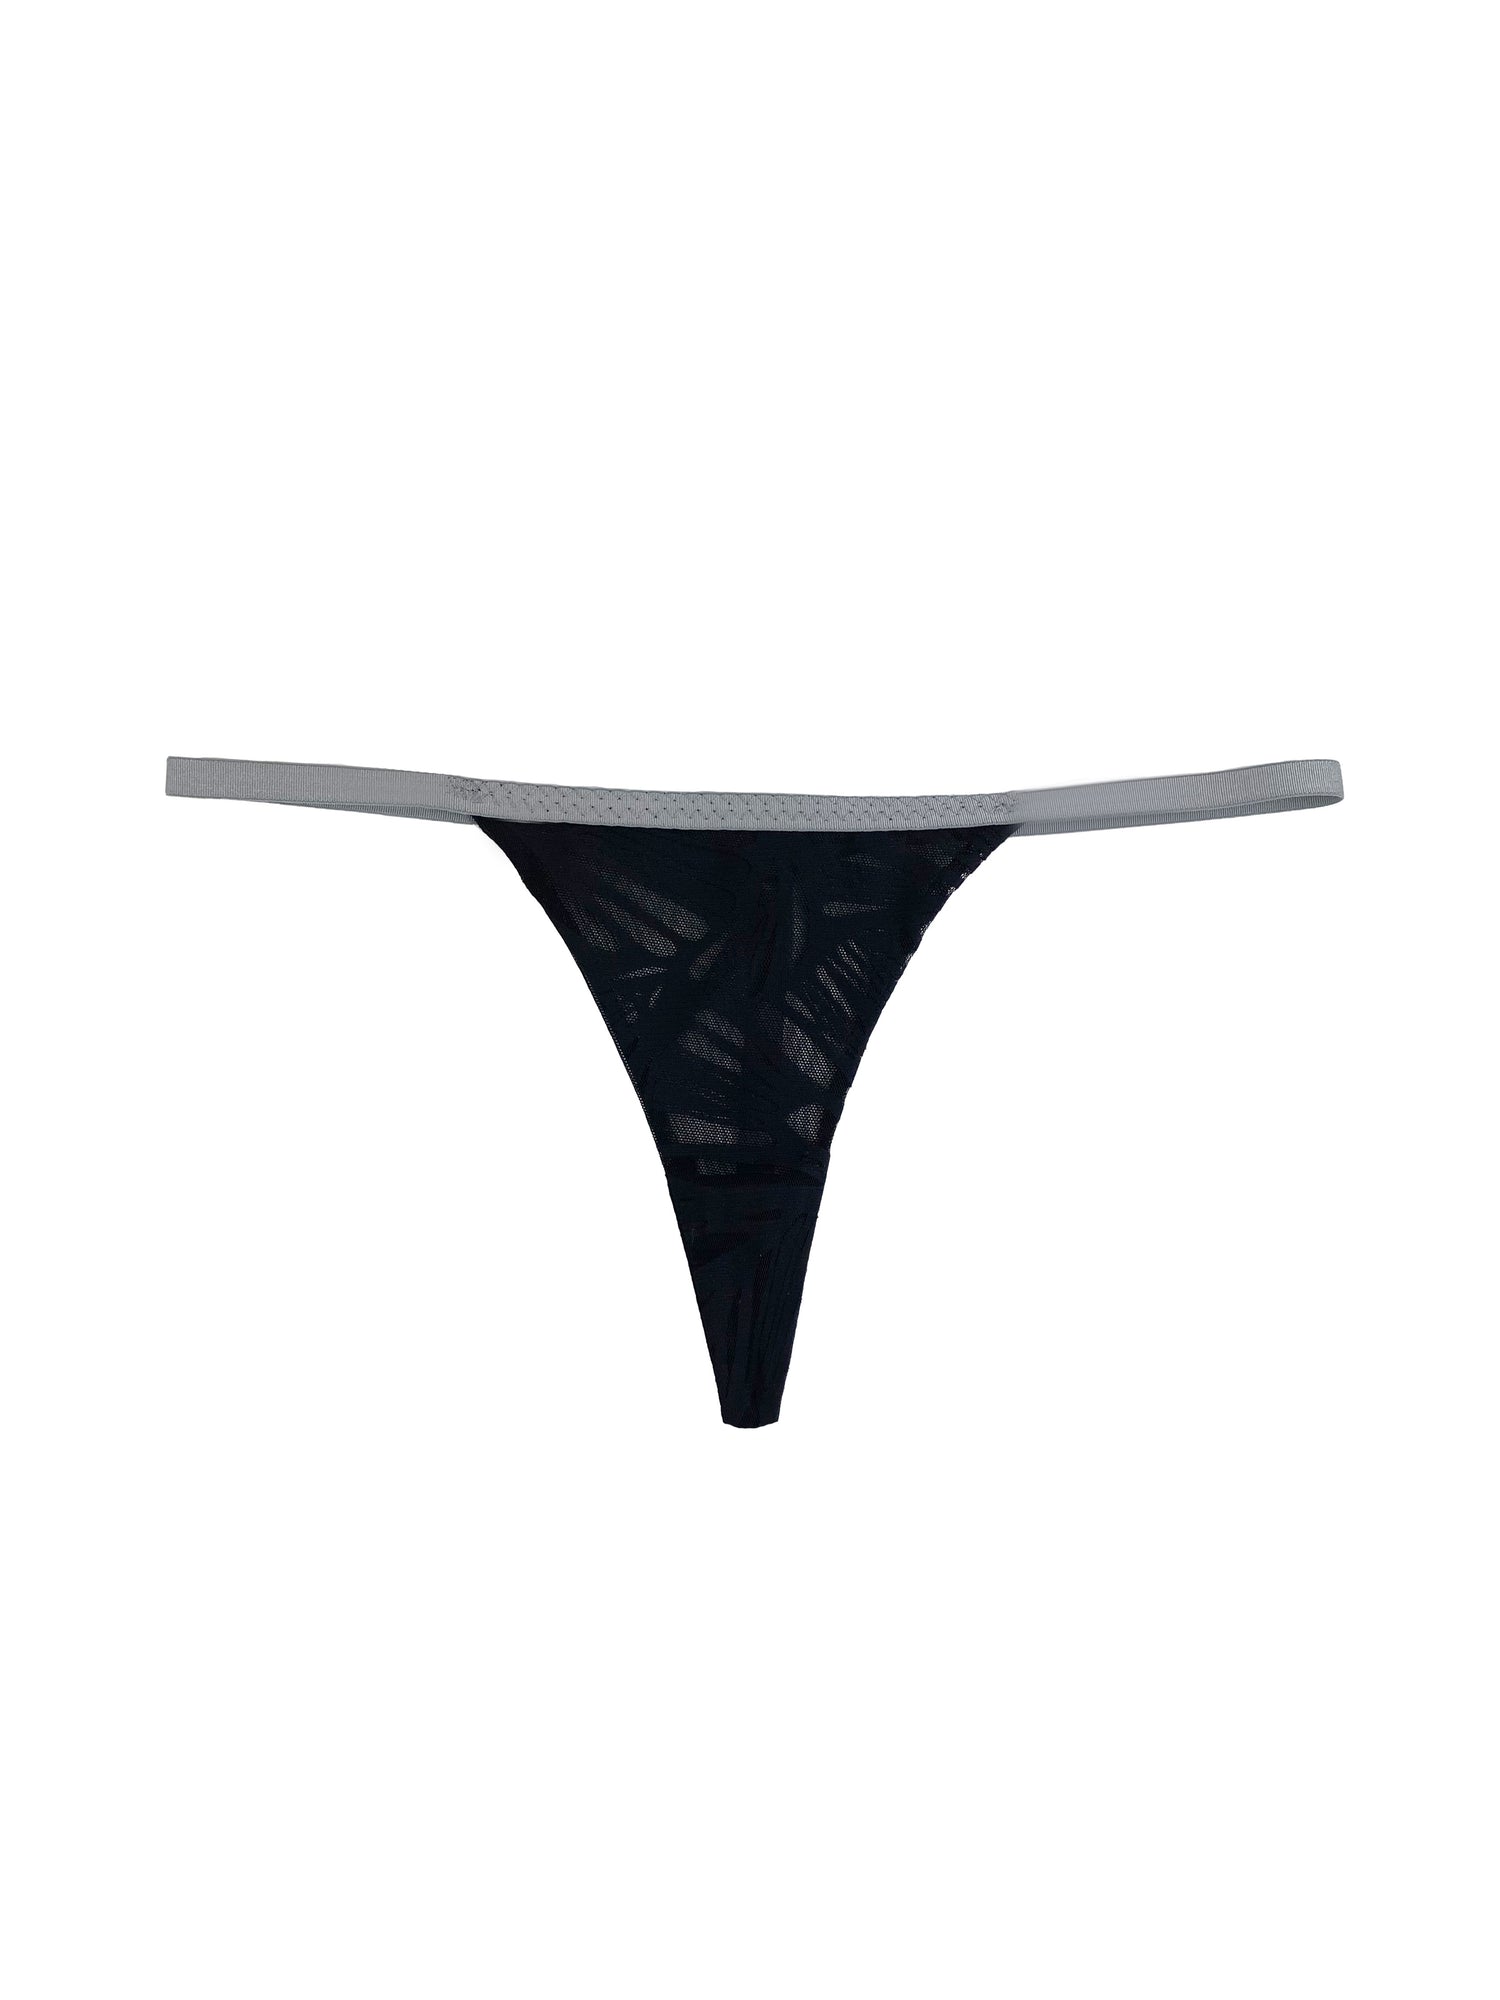 black thong with a gray trim and white background